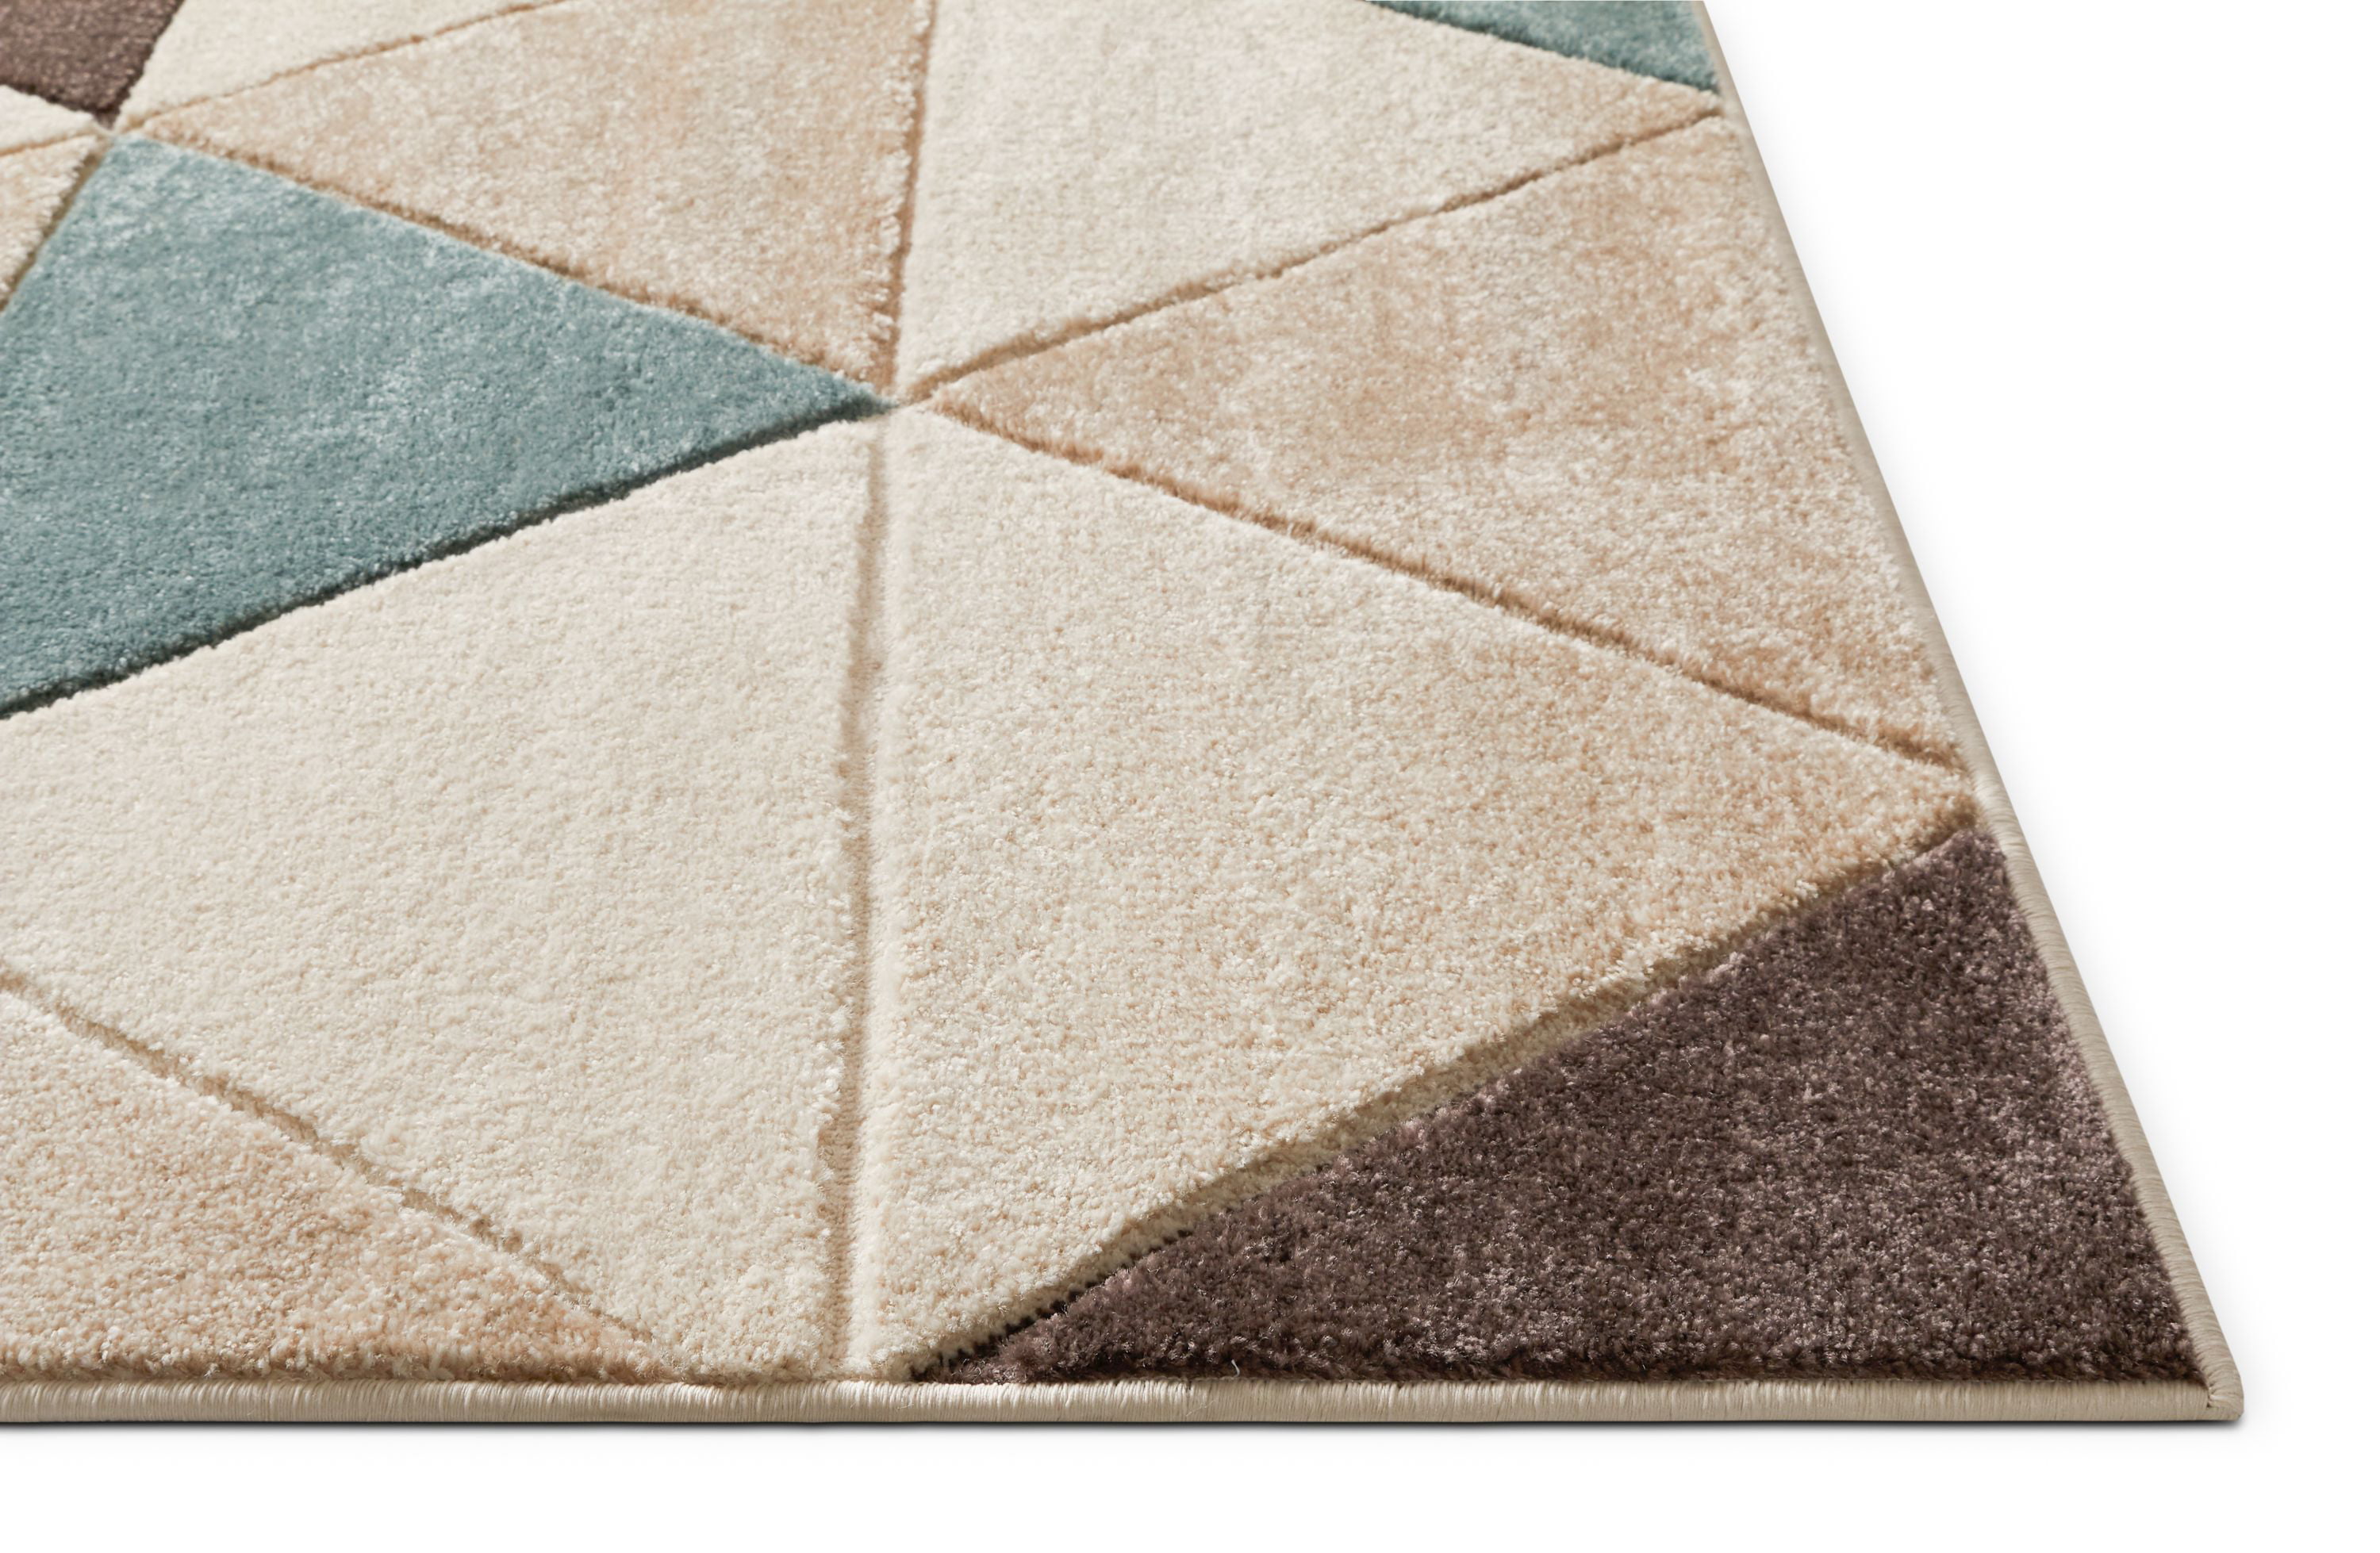 2' x 3' Area Rug Easy to Clean Stain & Fade Resistant Thick Soft Plush Well Woven Suave Angles Brown & Blue Modern Geometric Triangles Hand Carved 2x3 